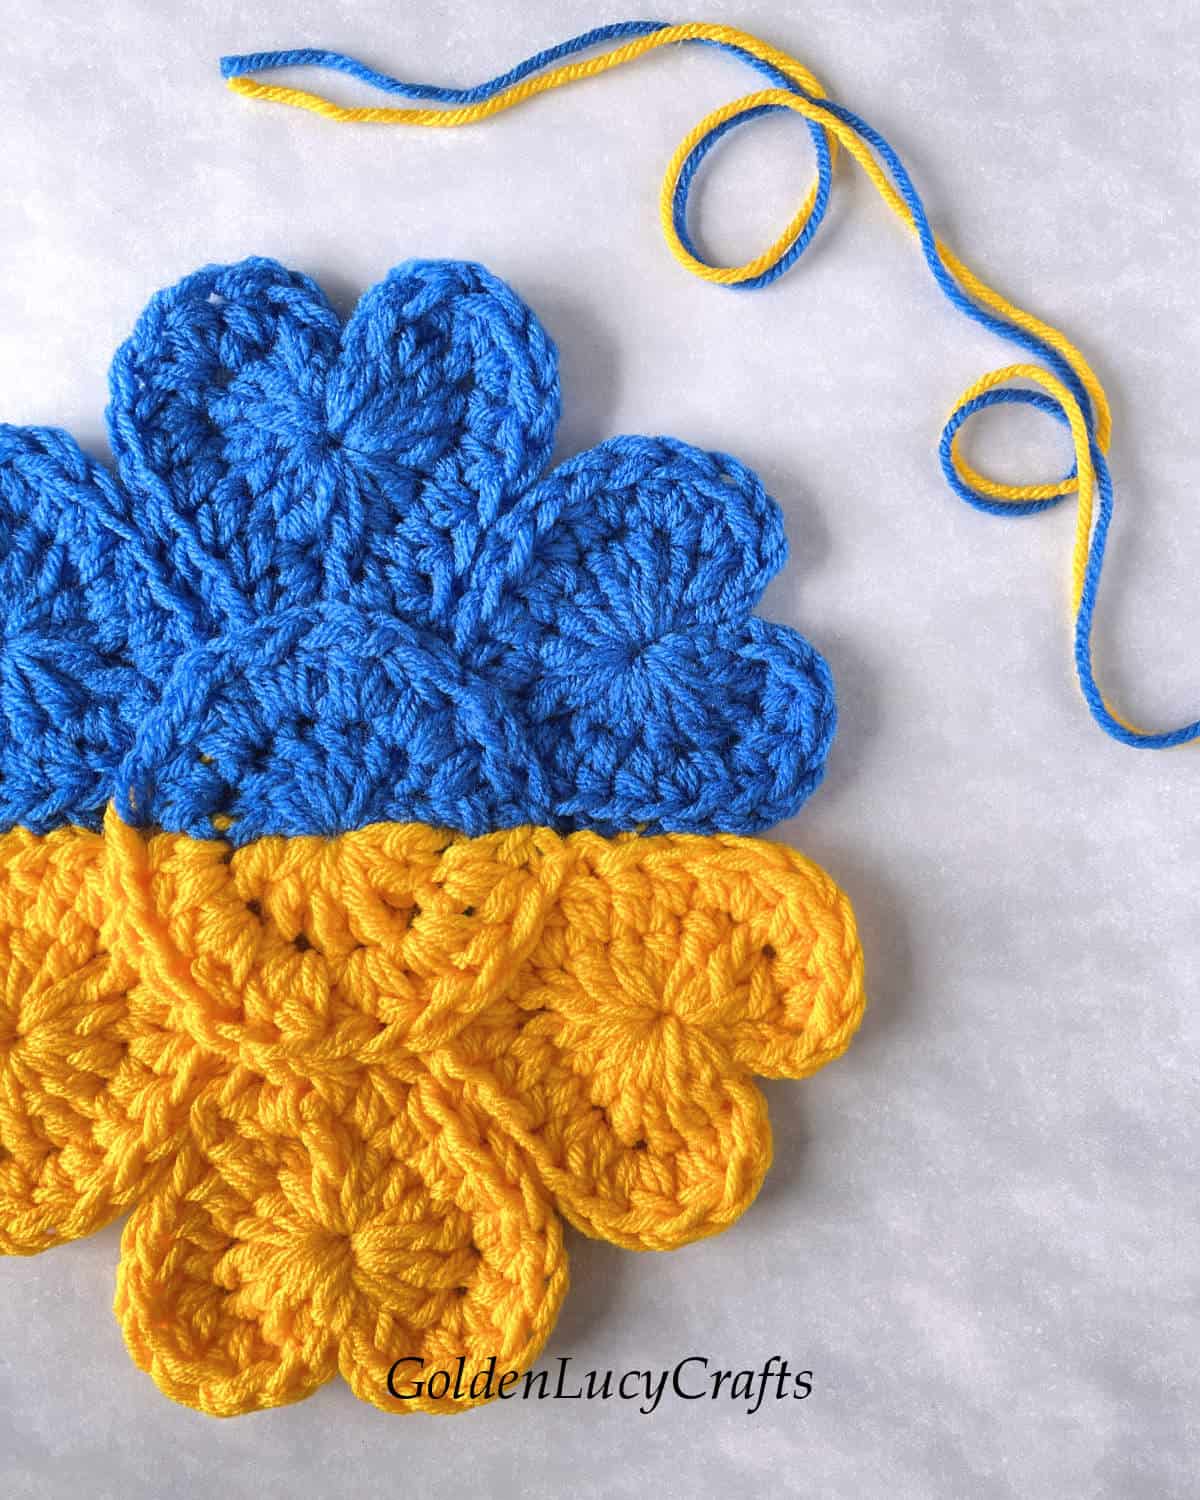 Yellow blue crochet flower close up picture.